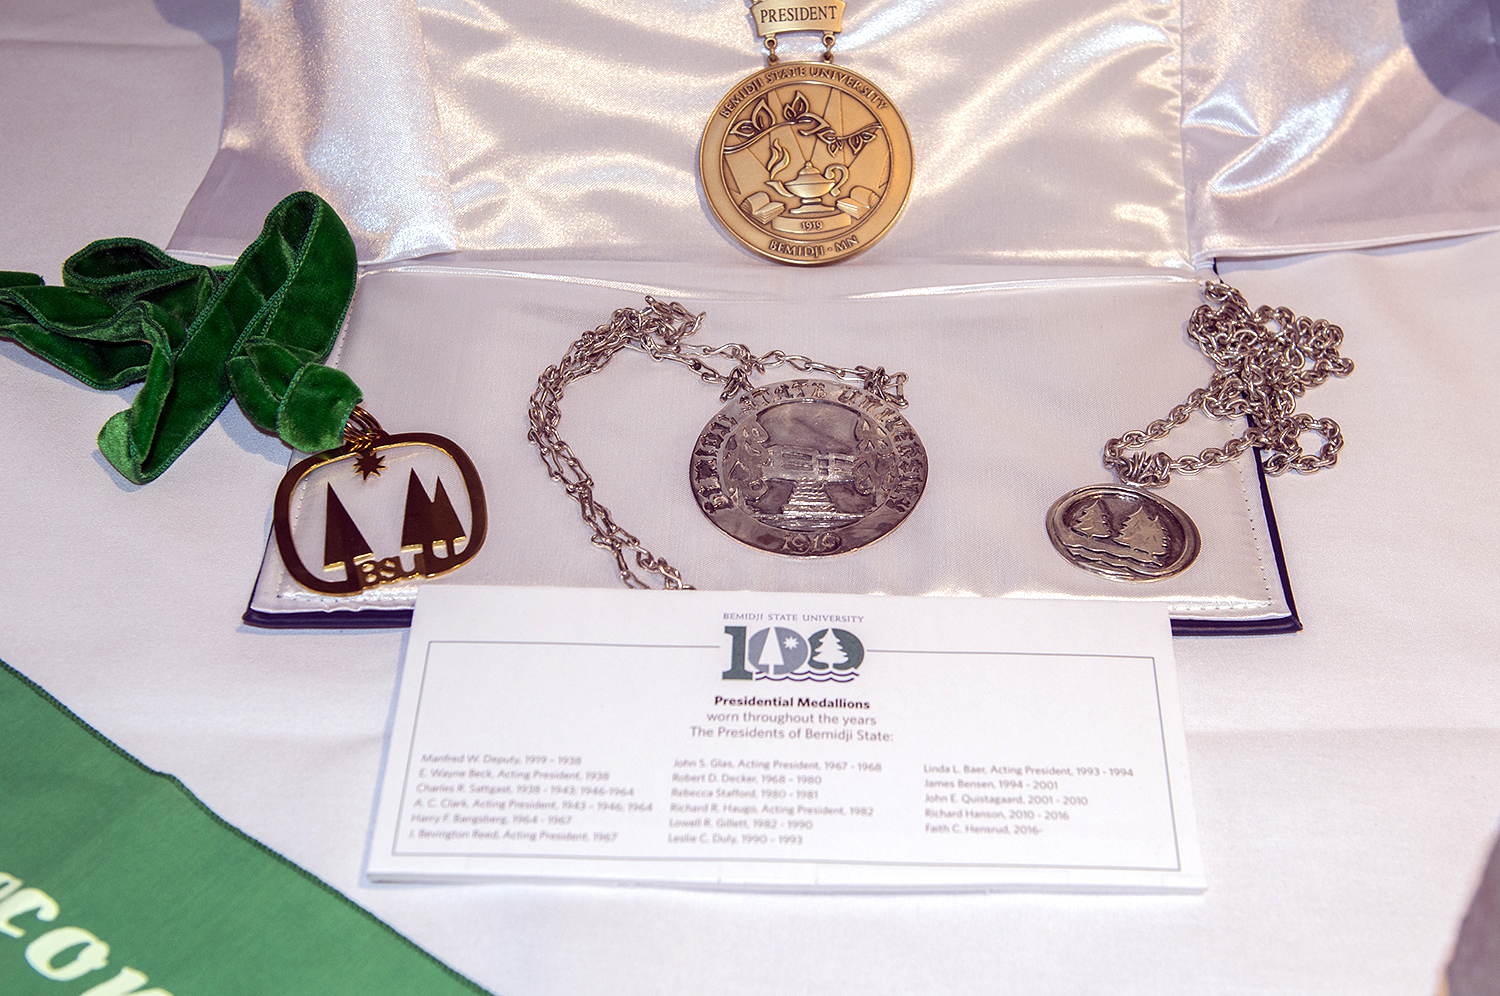 Presidential medallions displayed at the centennial kick off